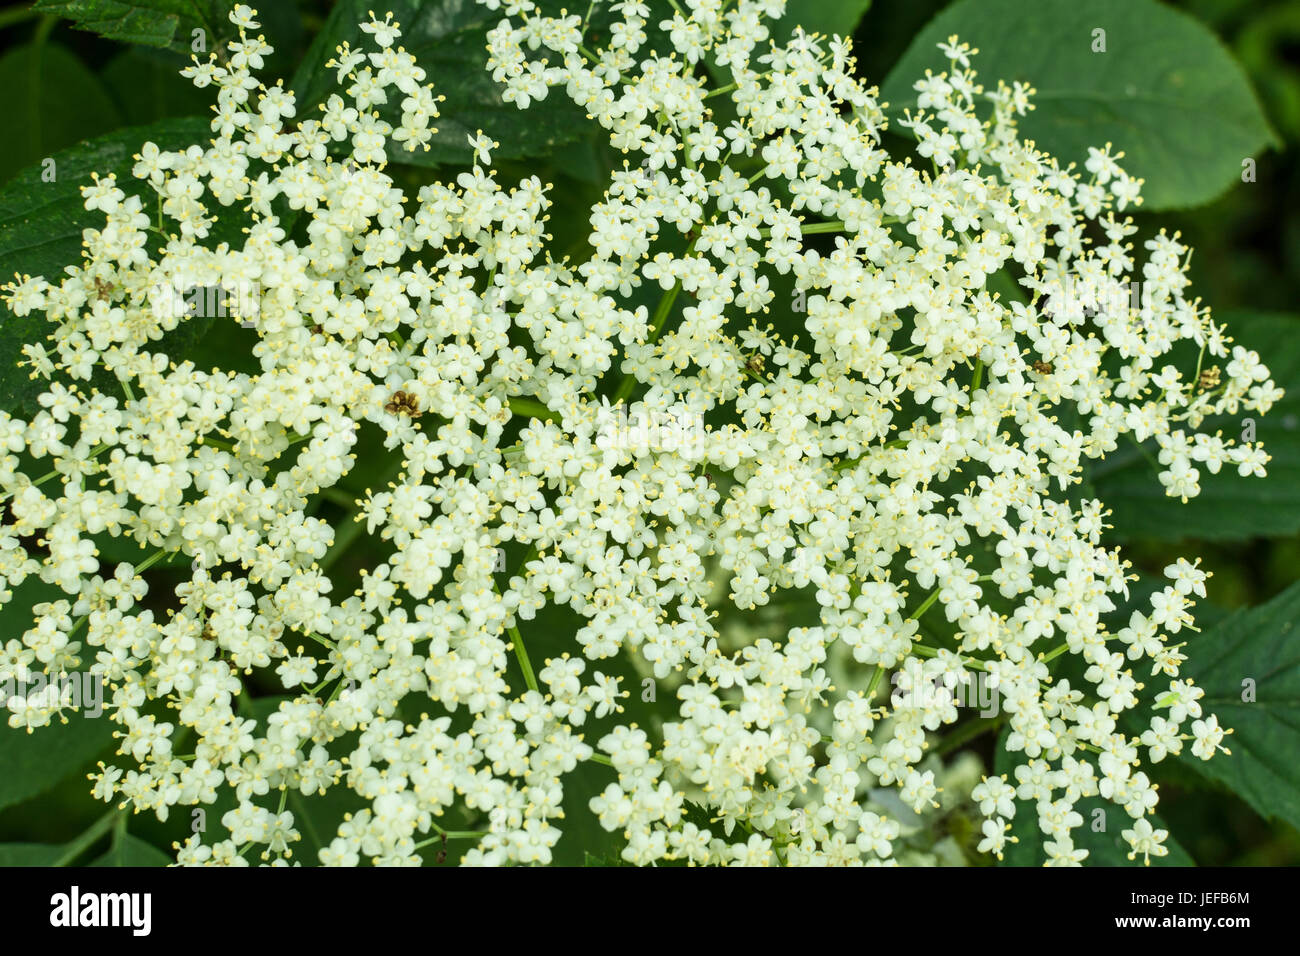 Close-up of the flowers of the Common Elder / Sambucus nigra from which elderflower wine and syrup are made. Stock Photo